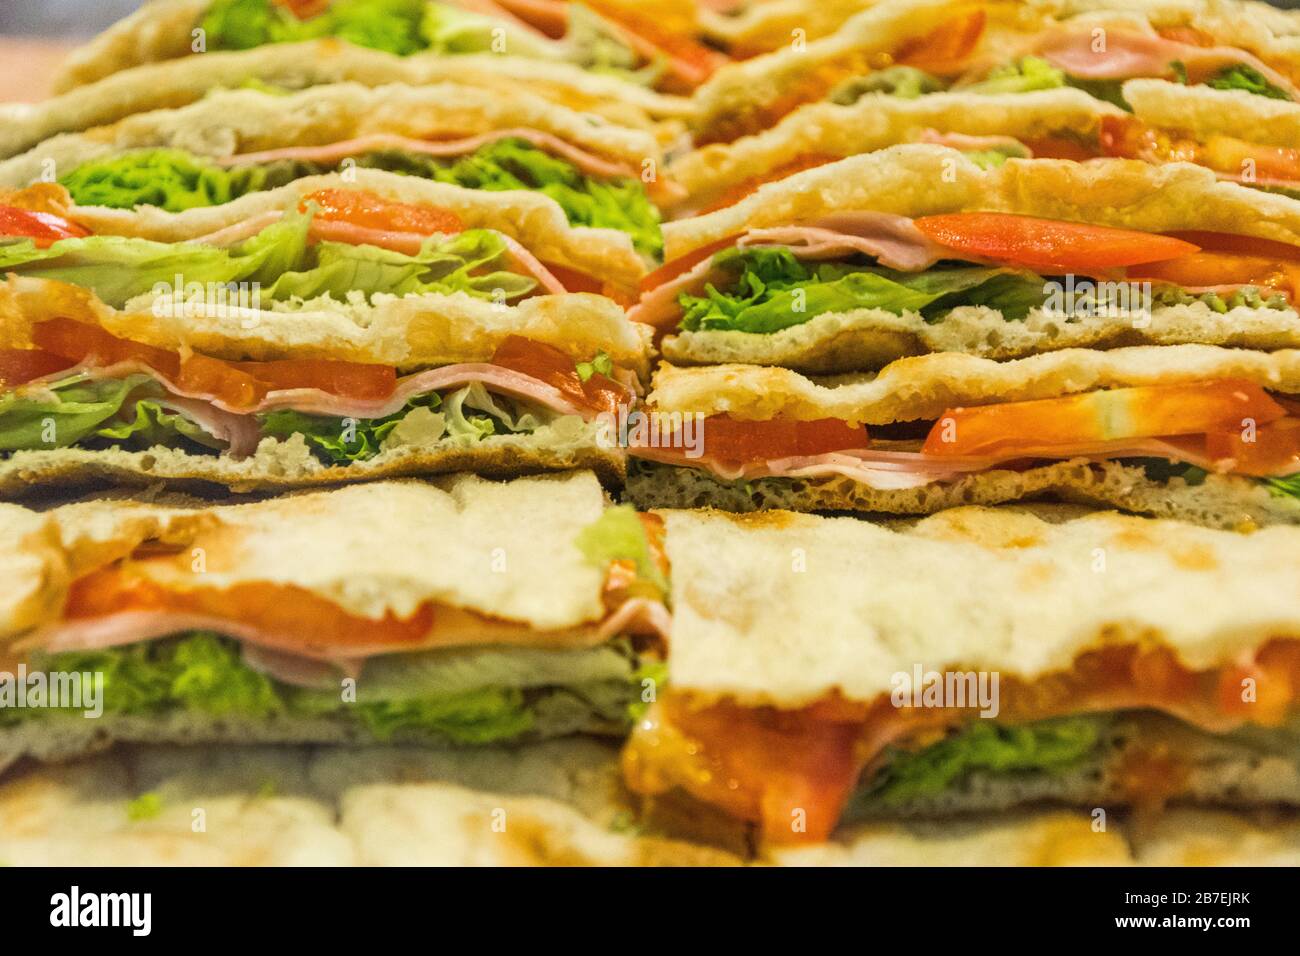 Pita sandwich with greens and tomatoes Stock Photo